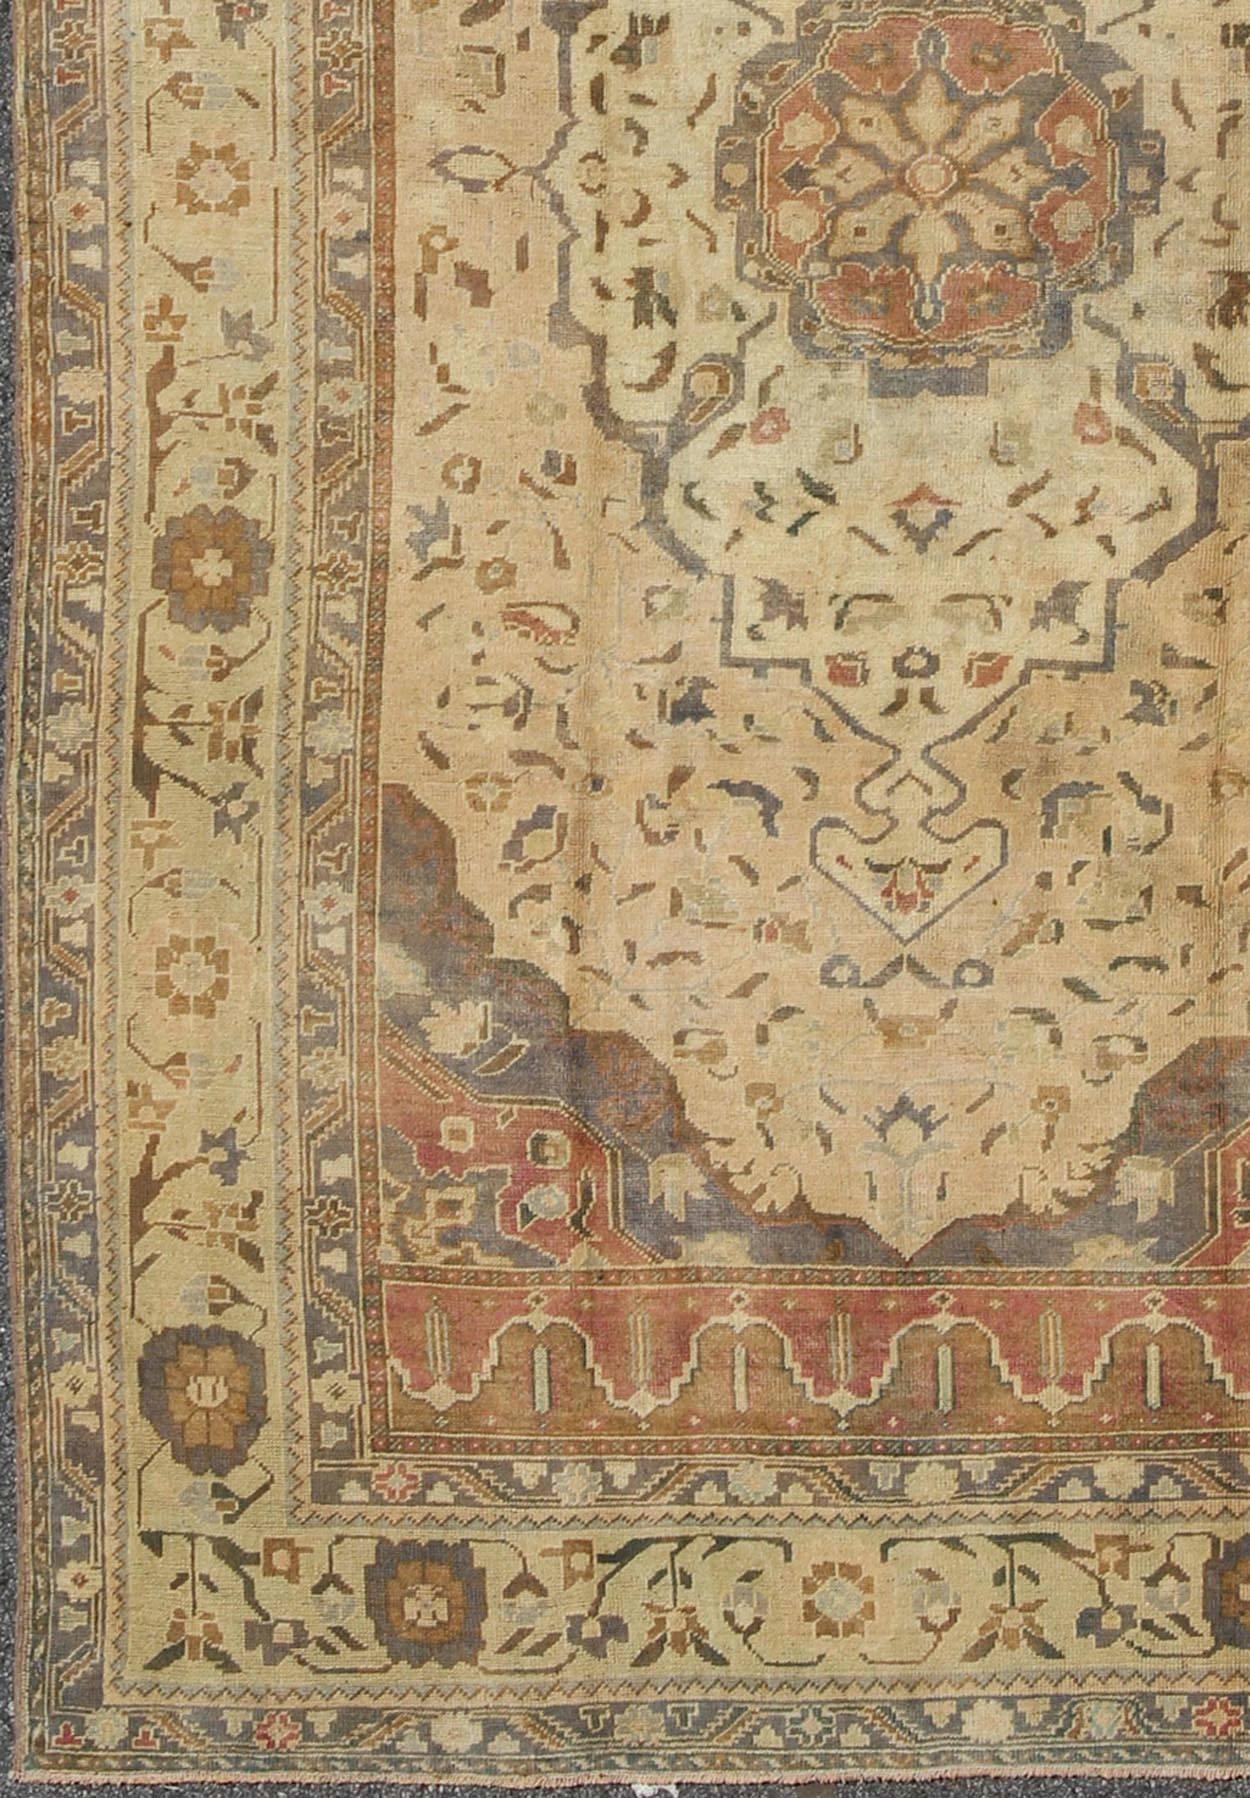 Turkish Oushak rug vintage with layered medallion in ivory, red, blue and olive, rug en-421, country of origin / type: Turkey / Oushak, circa mid-20th century.

This vintage Turkish Oushak rug (circa mid-20th century) features a unique blend of